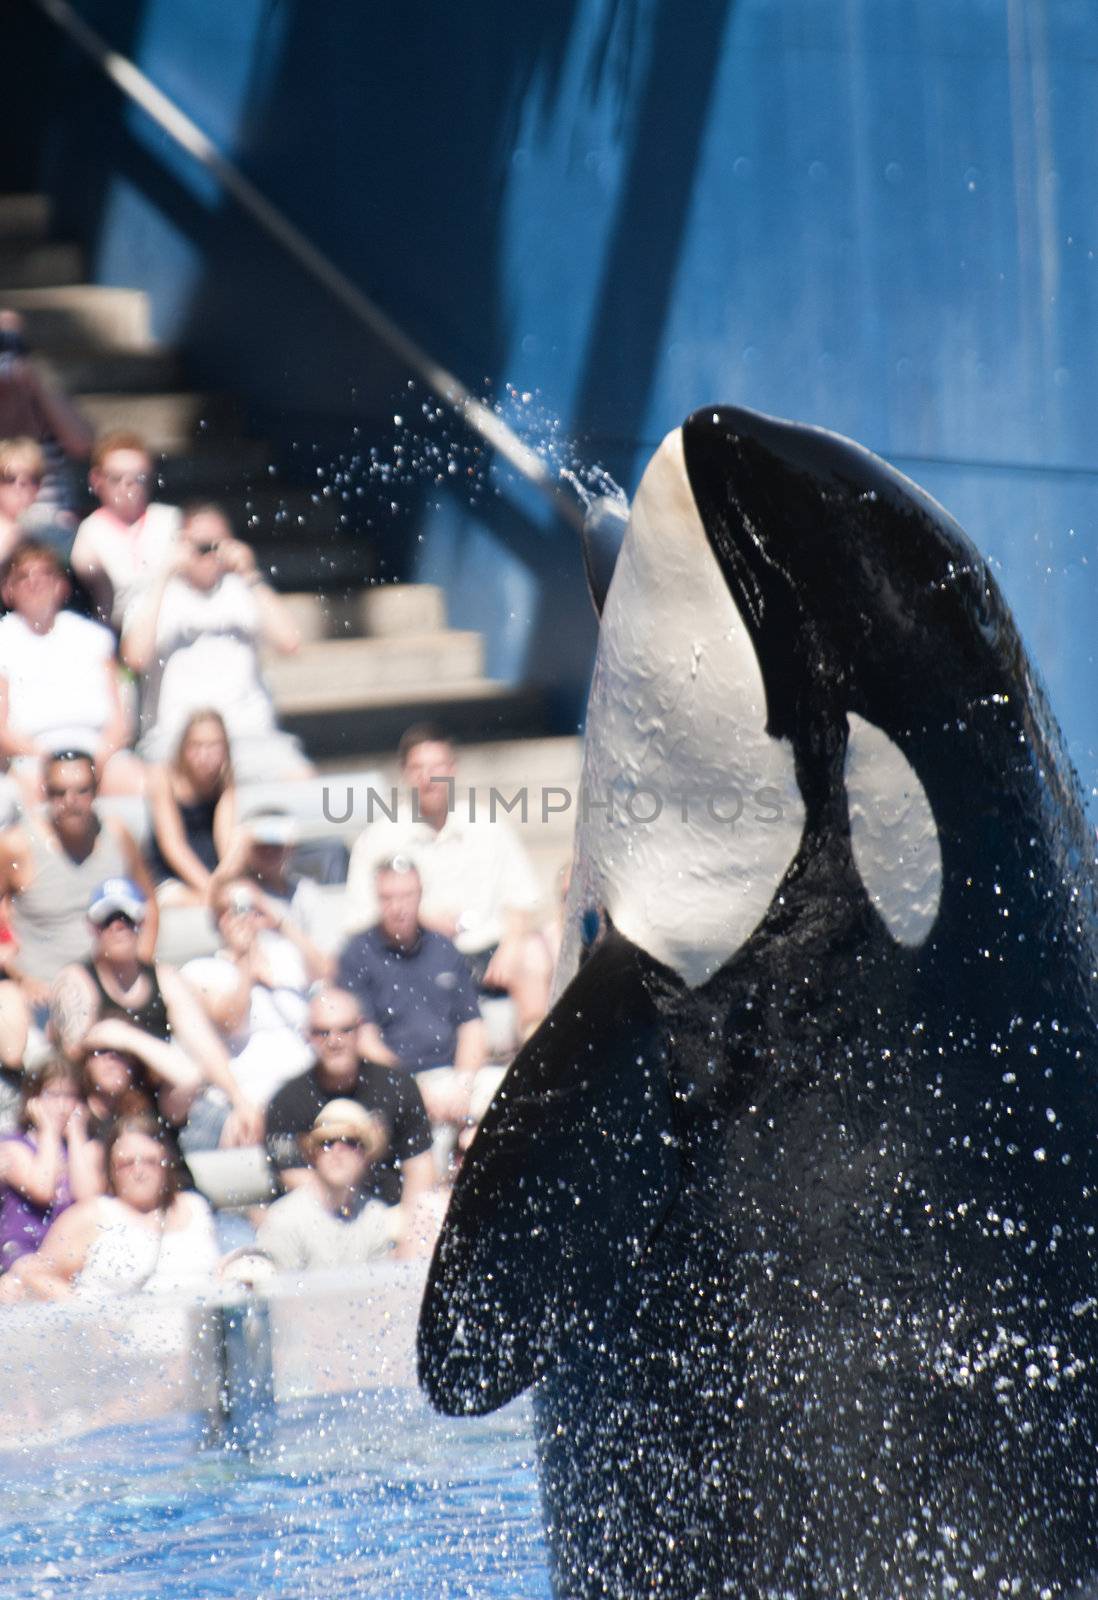 A Jumping Orca (Killer) Whale at Seaworld, Florida, 9th October 2010. Seaworld Orlando attracts more then 6 million visitors a year.